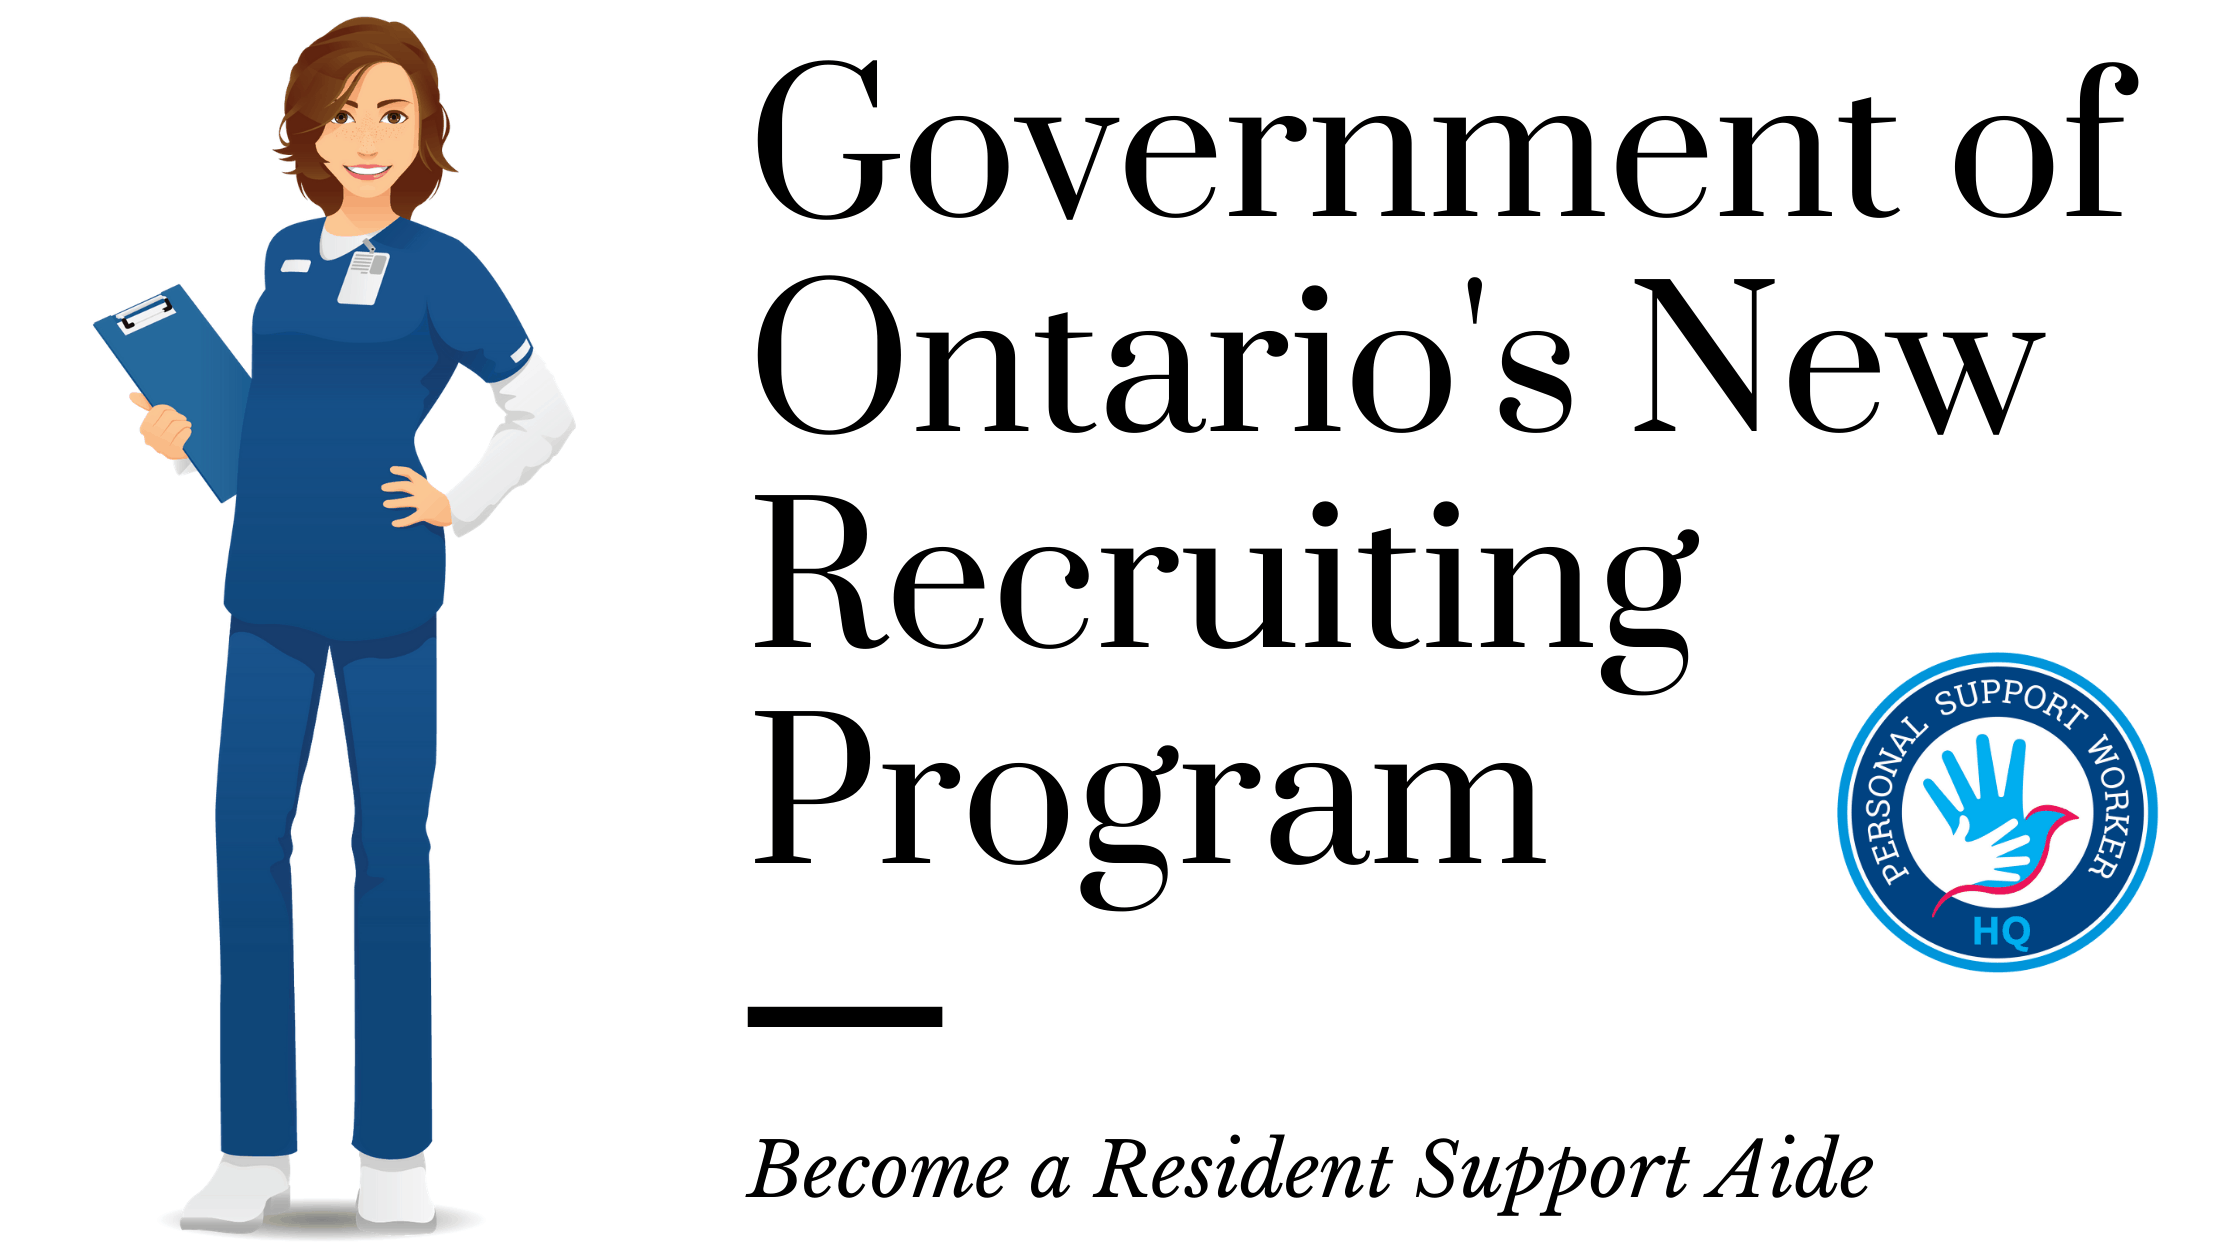 The Government of Ontario's new recruiting program. Work as resident support aide. 